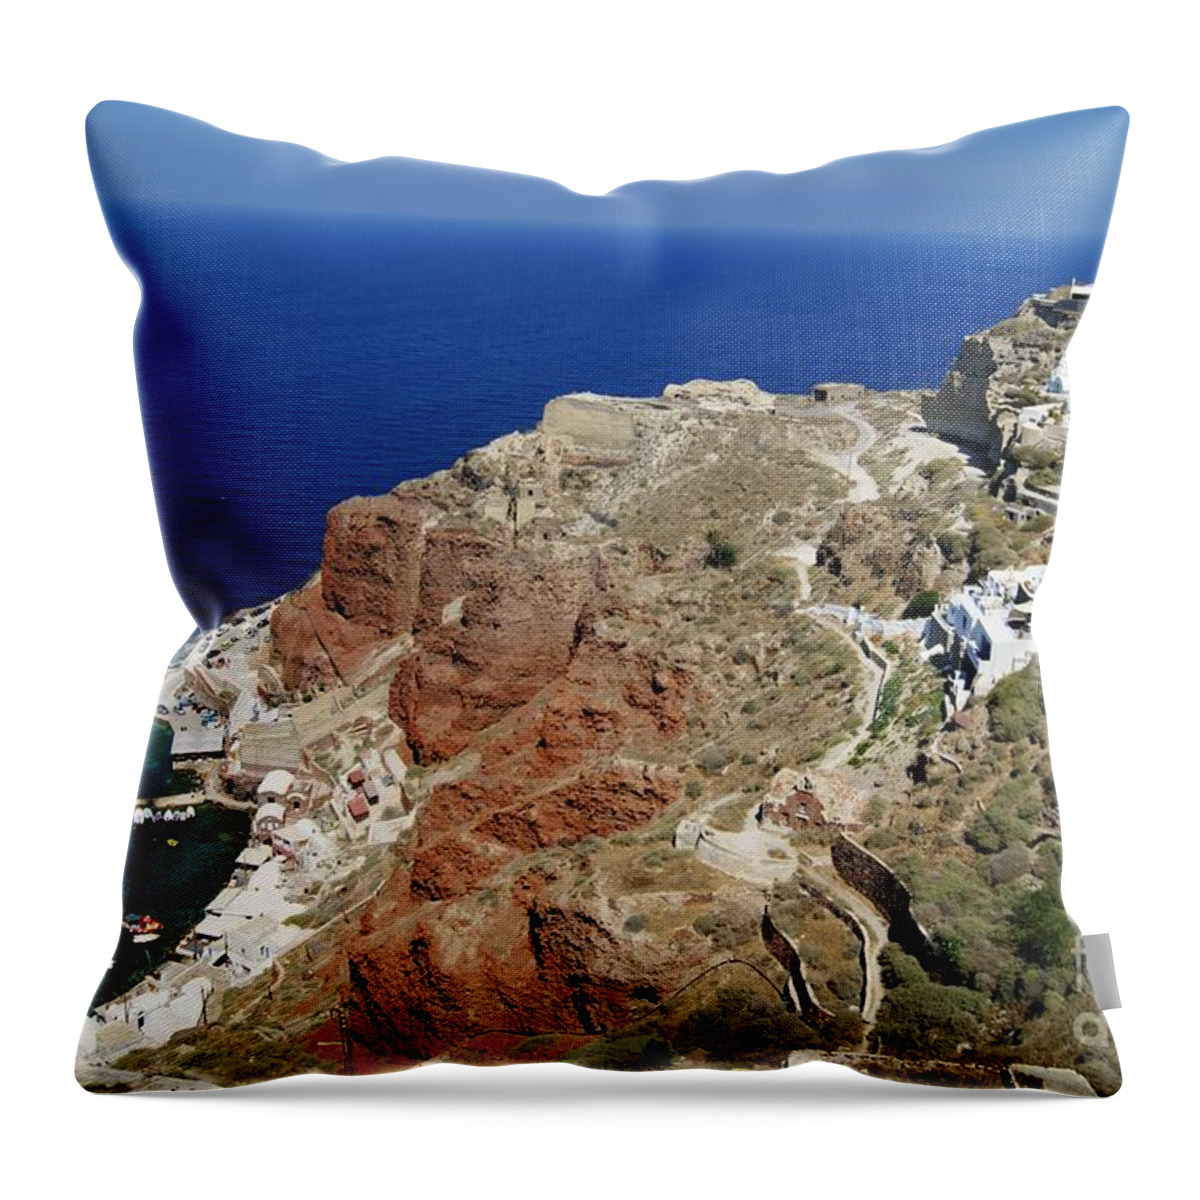  Blue Throw Pillow featuring the photograph Down To The Harbor by David Birchall